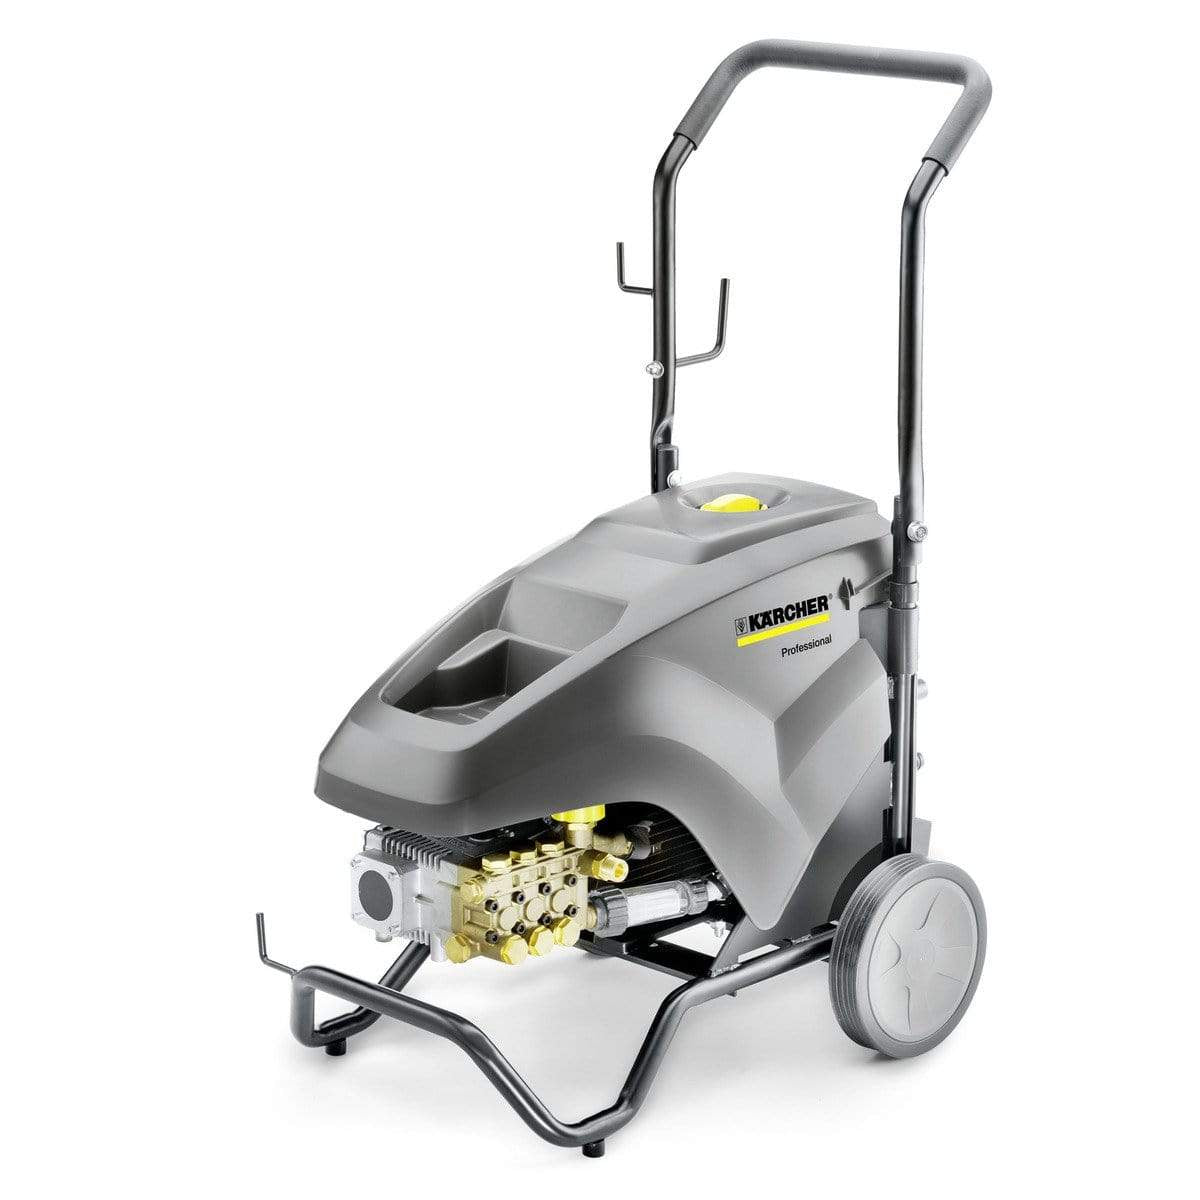 Karcher Cold Water High Pressure Washer 180 Bar - HD7/18-4 M | Supply Master | Accra, Ghana Tools Building Steel Engineering Hardware tool